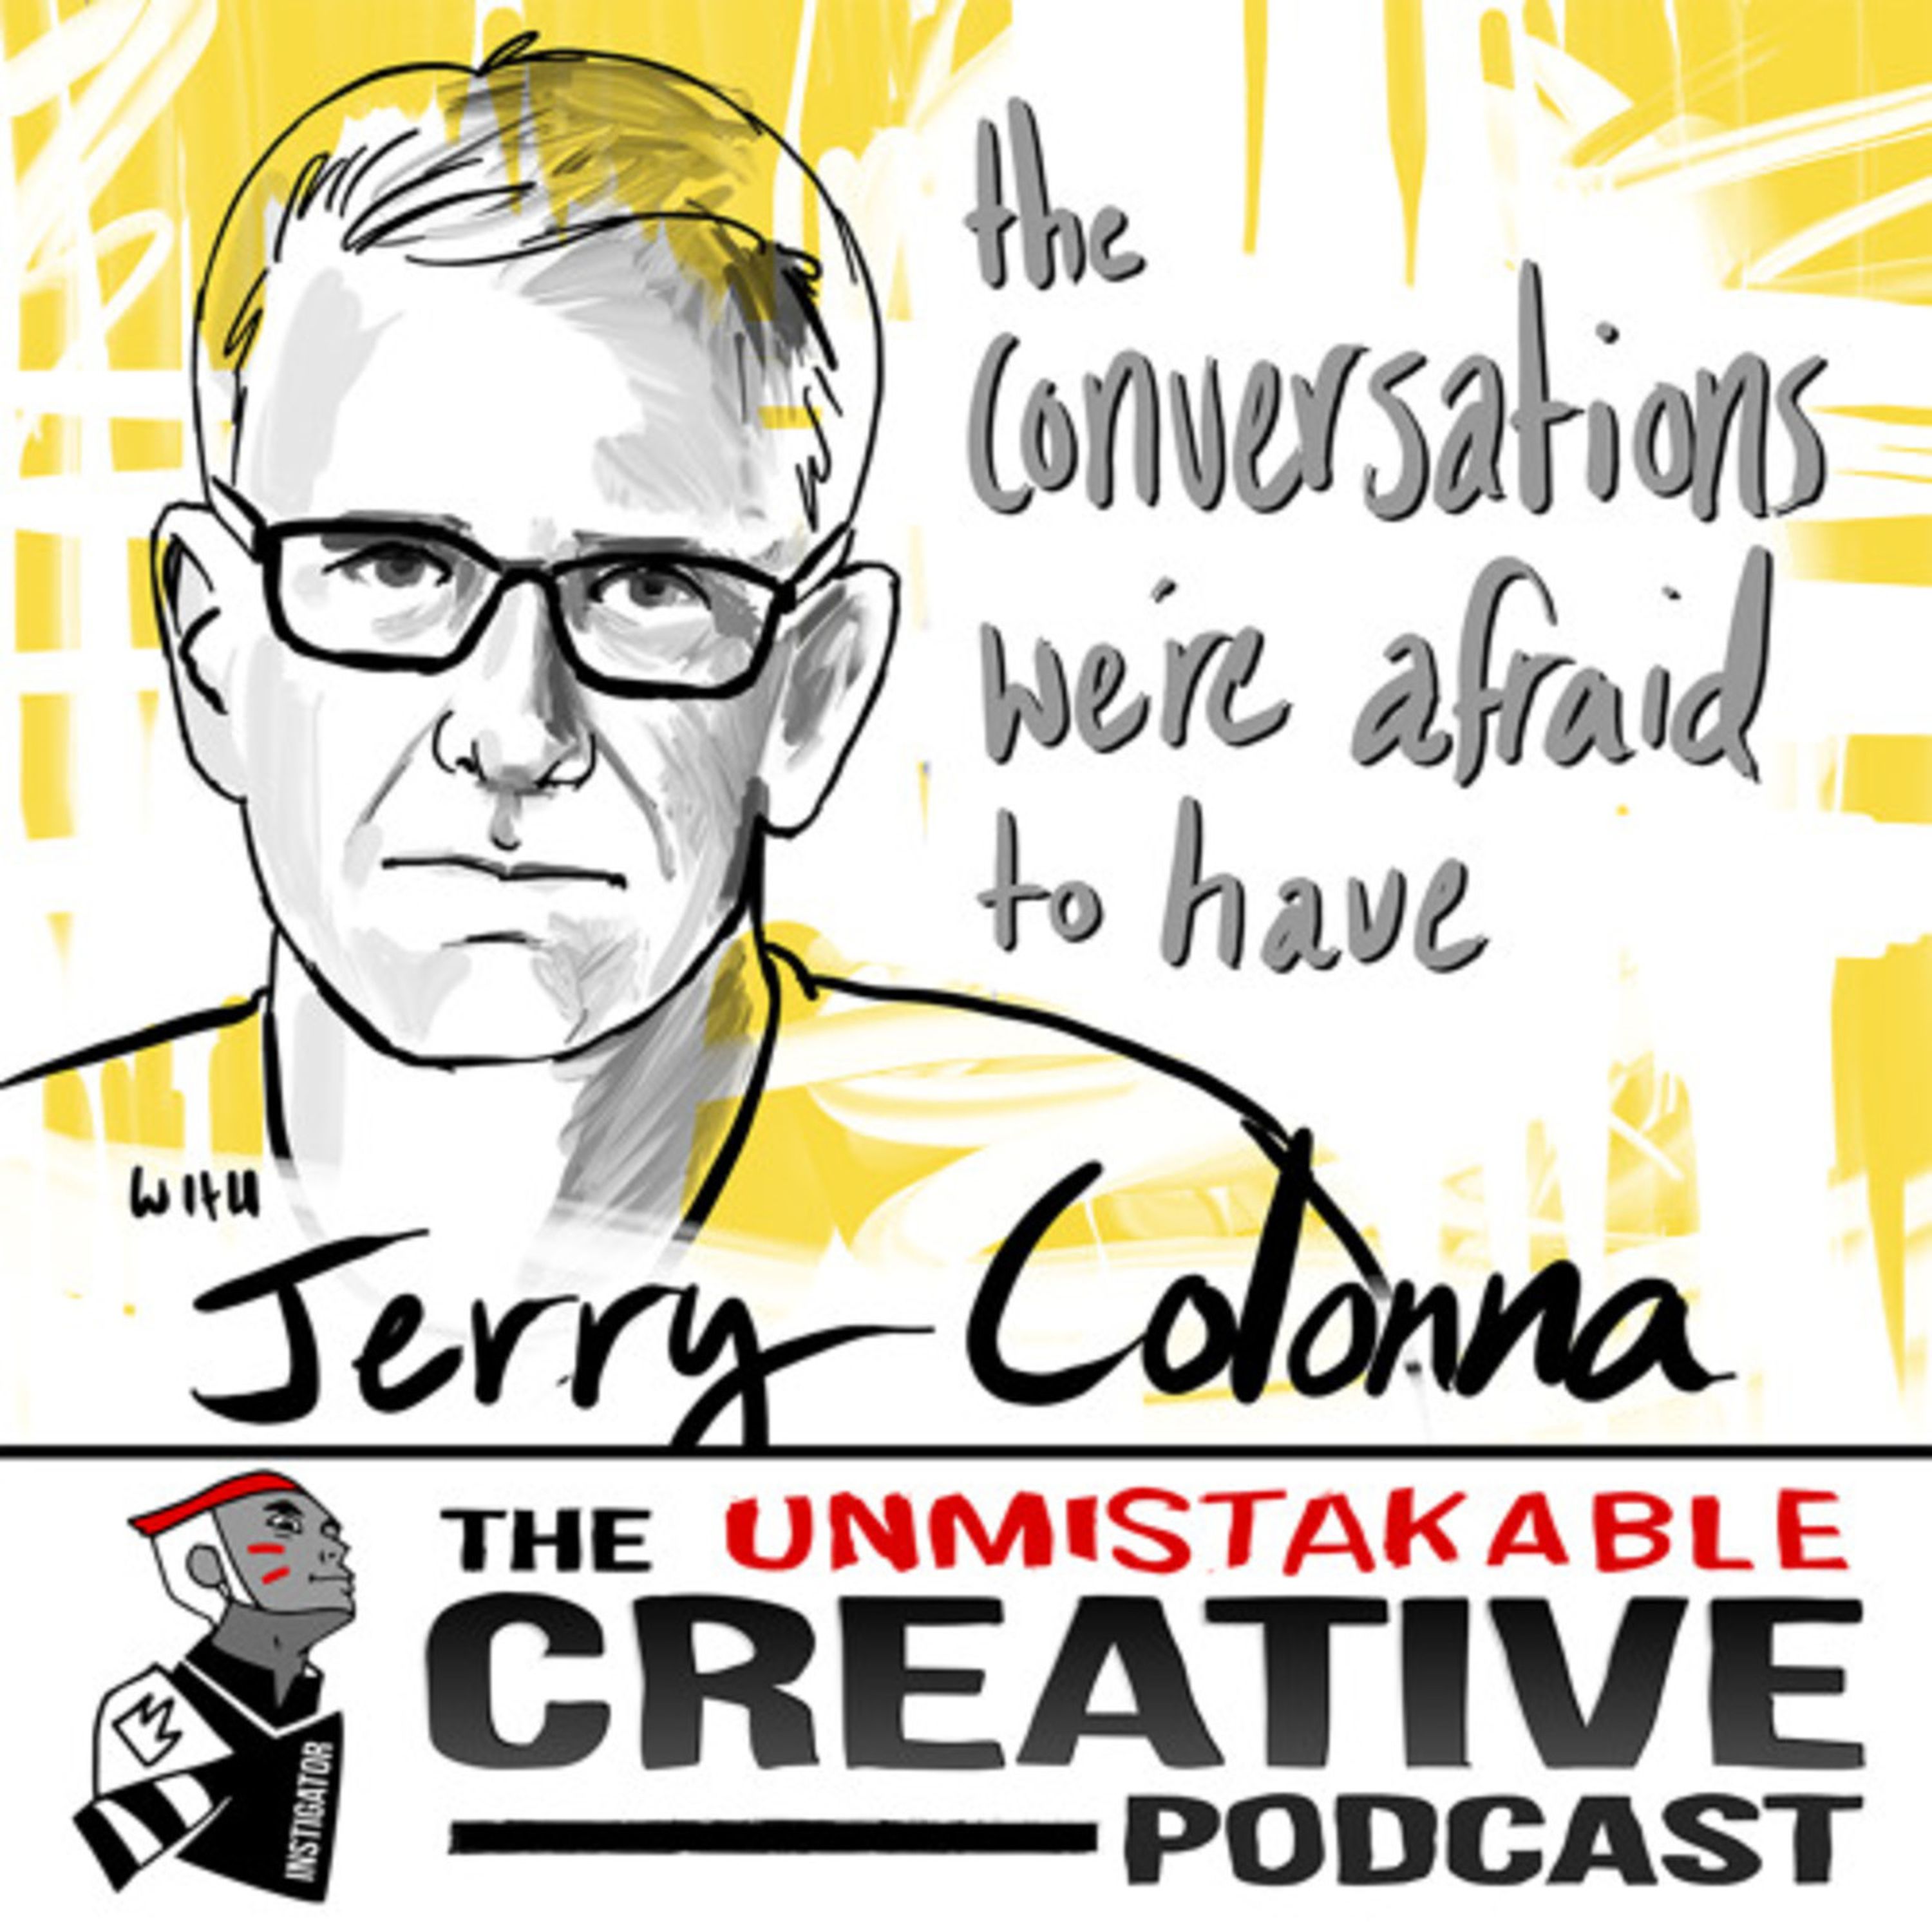 The Unmistakable Creative Podcast